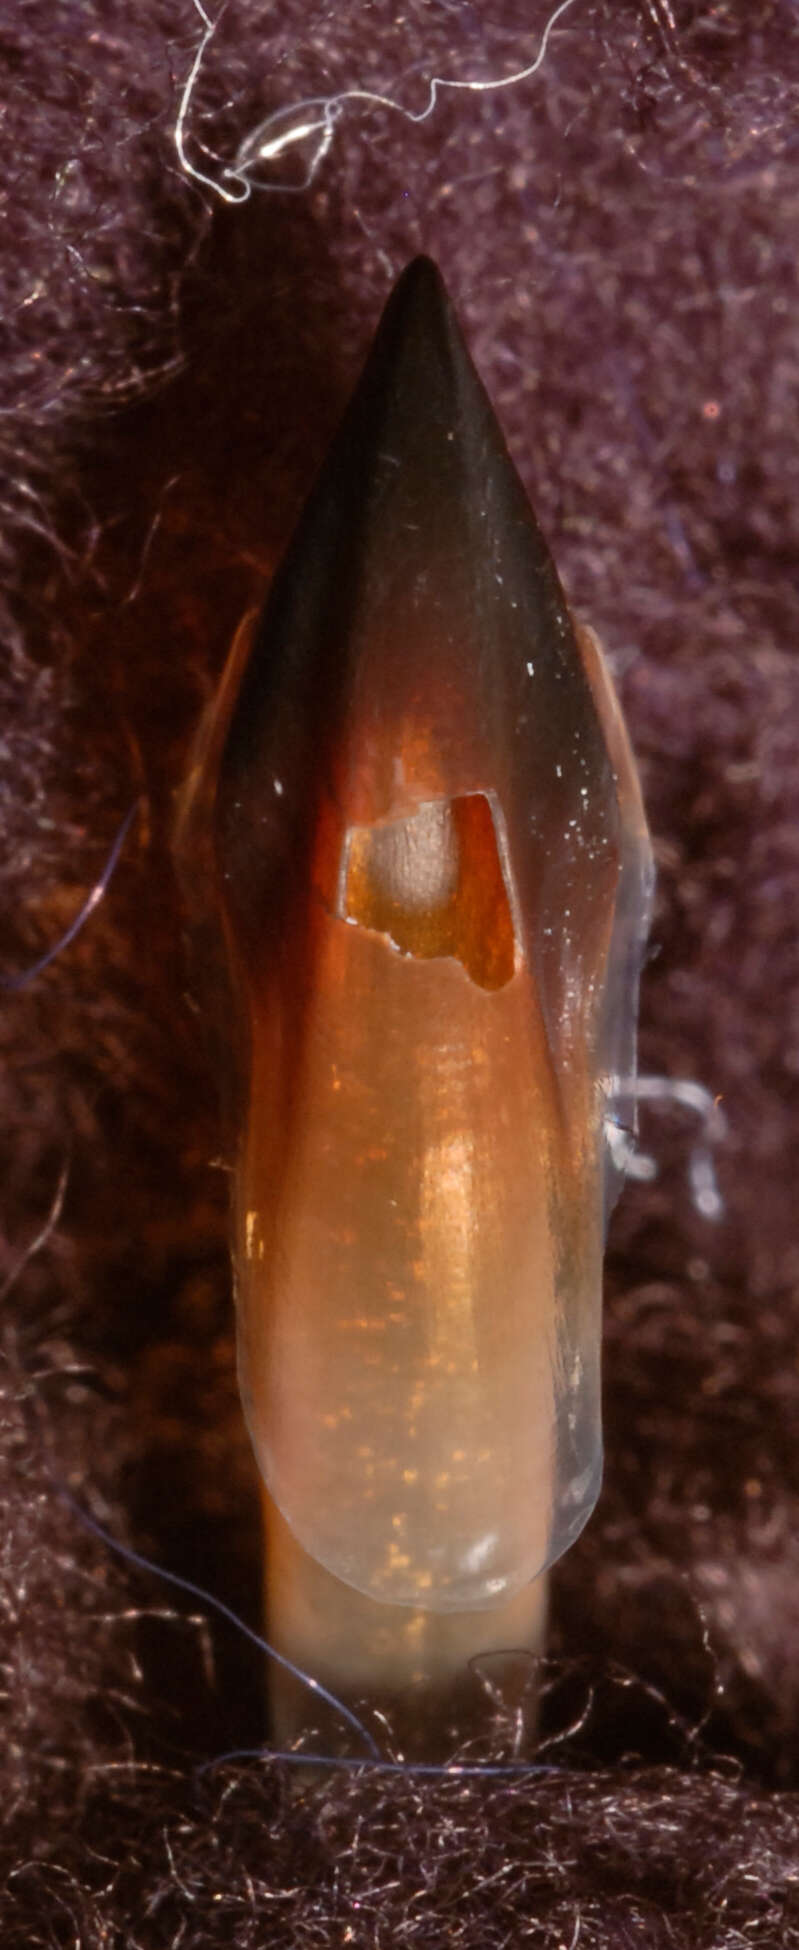 Image of pink scaled squid